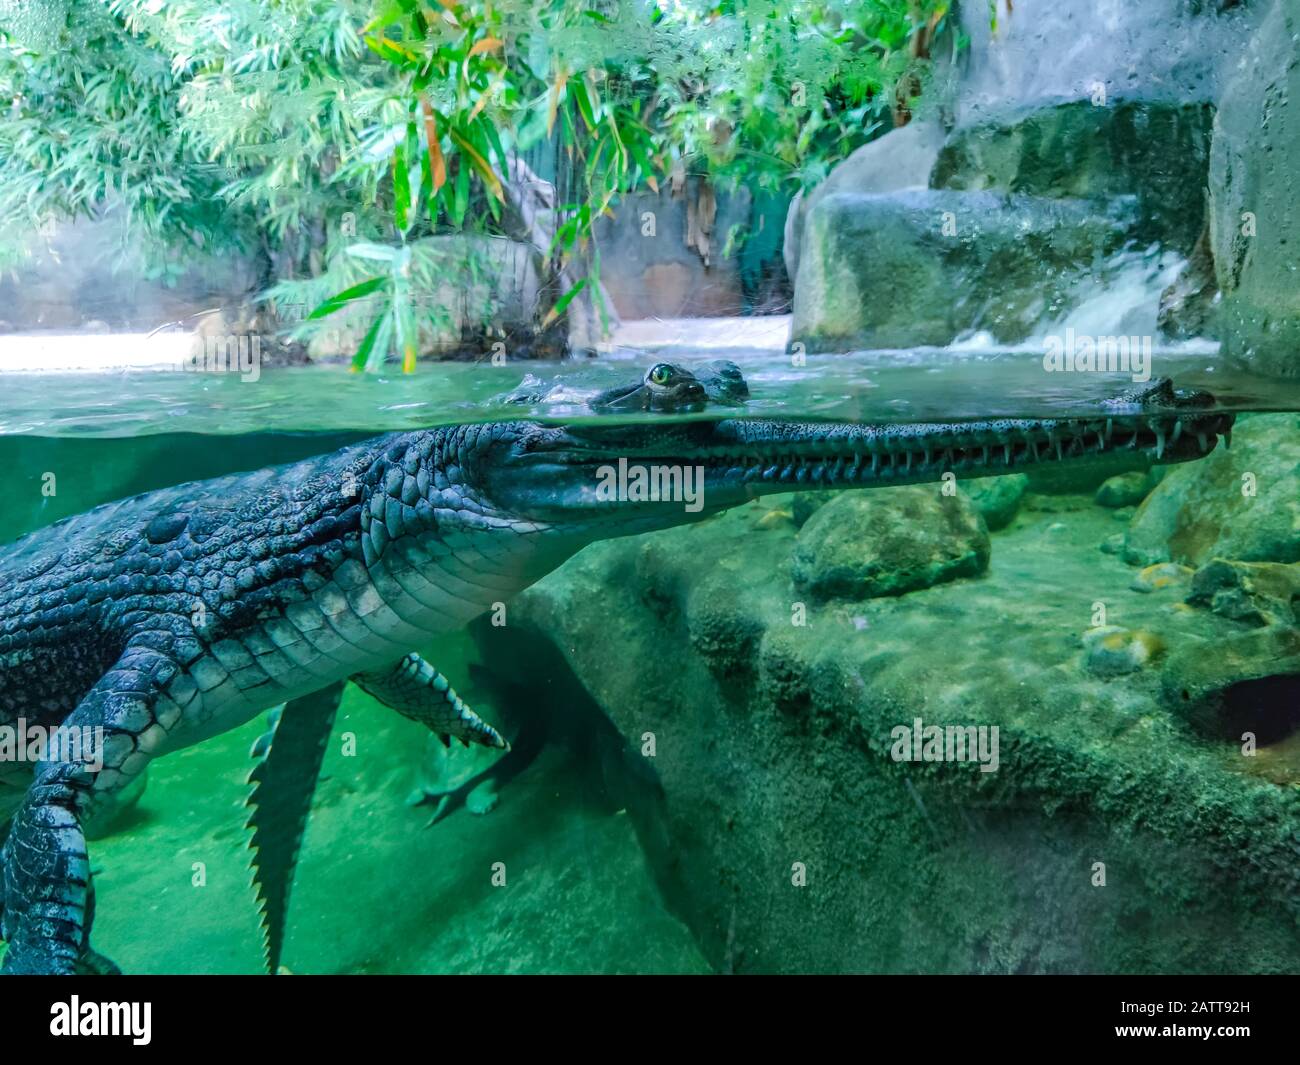 Underwater photo of green crocodile with green eyes. His head is above water and his body is under water. Stock Photo